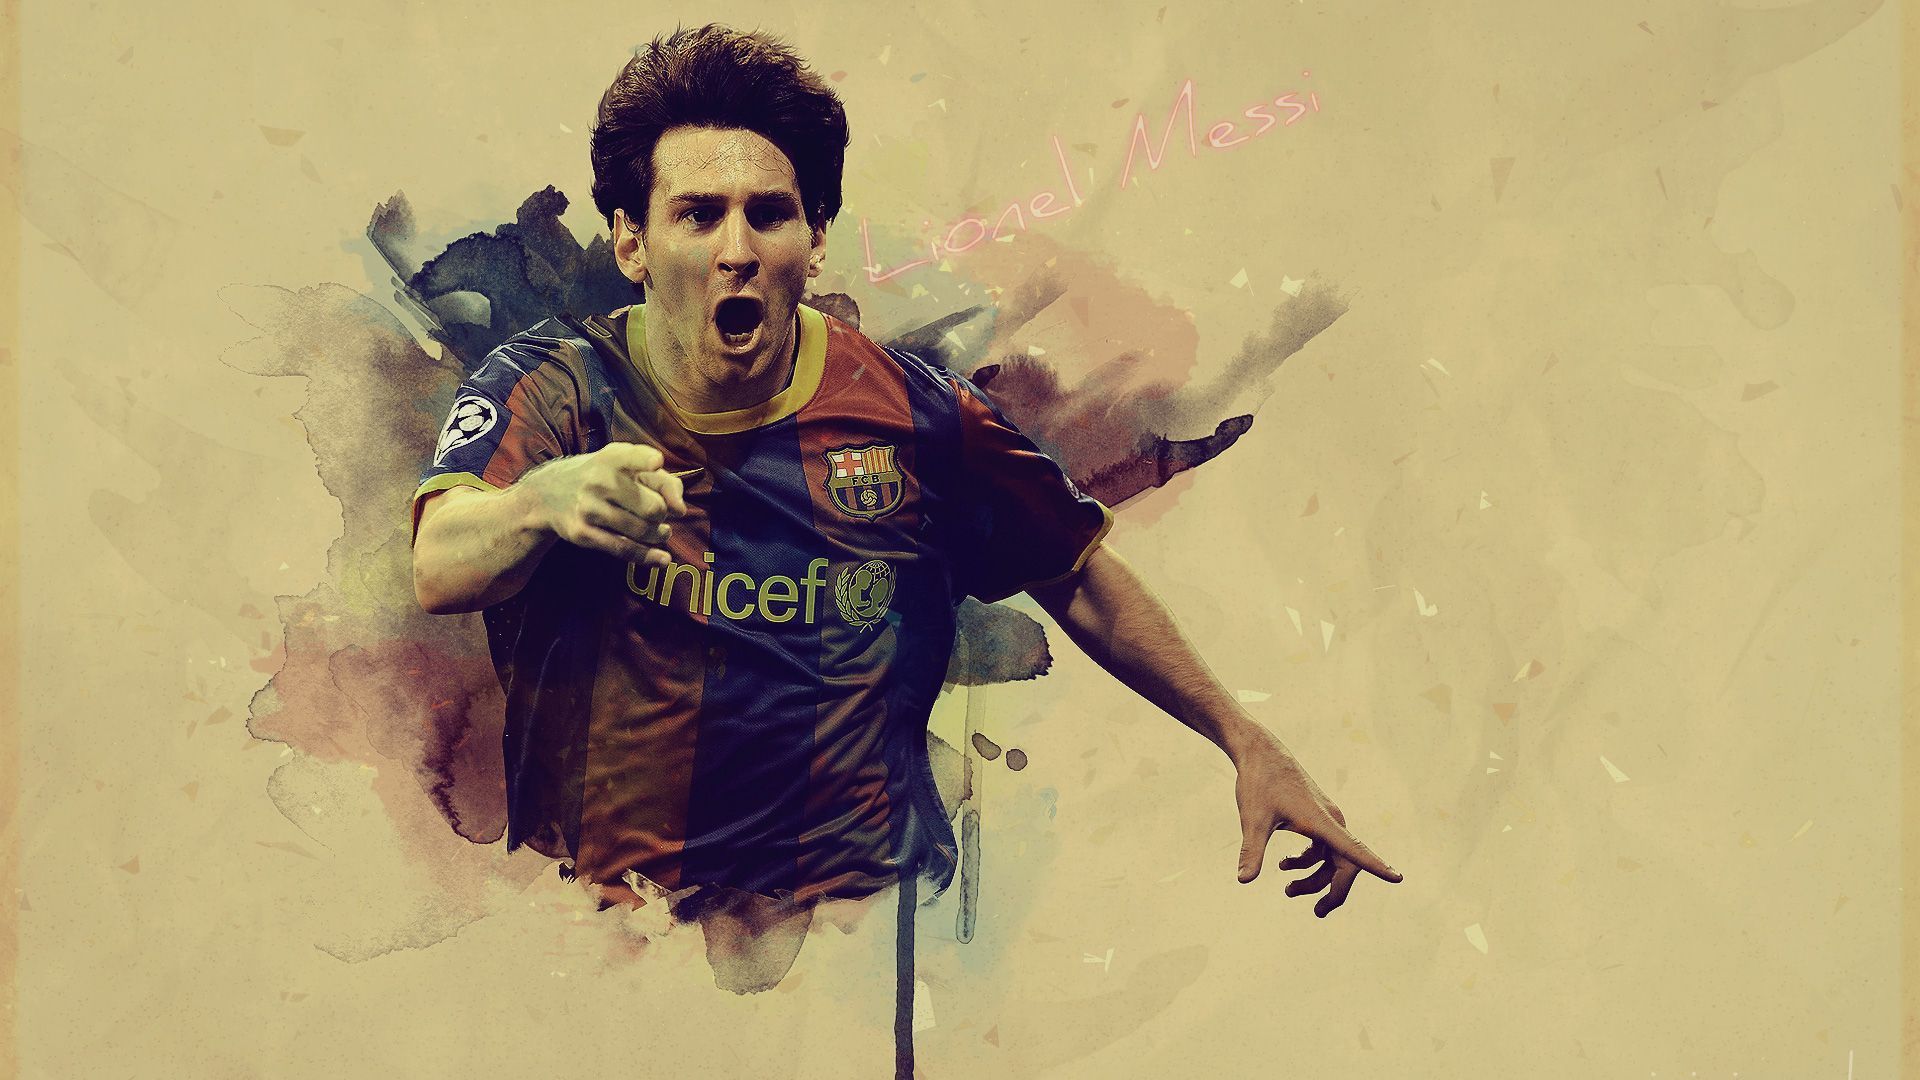 2013 Messi Picture HD Wallpaper Backgrounds | Wallpicshd